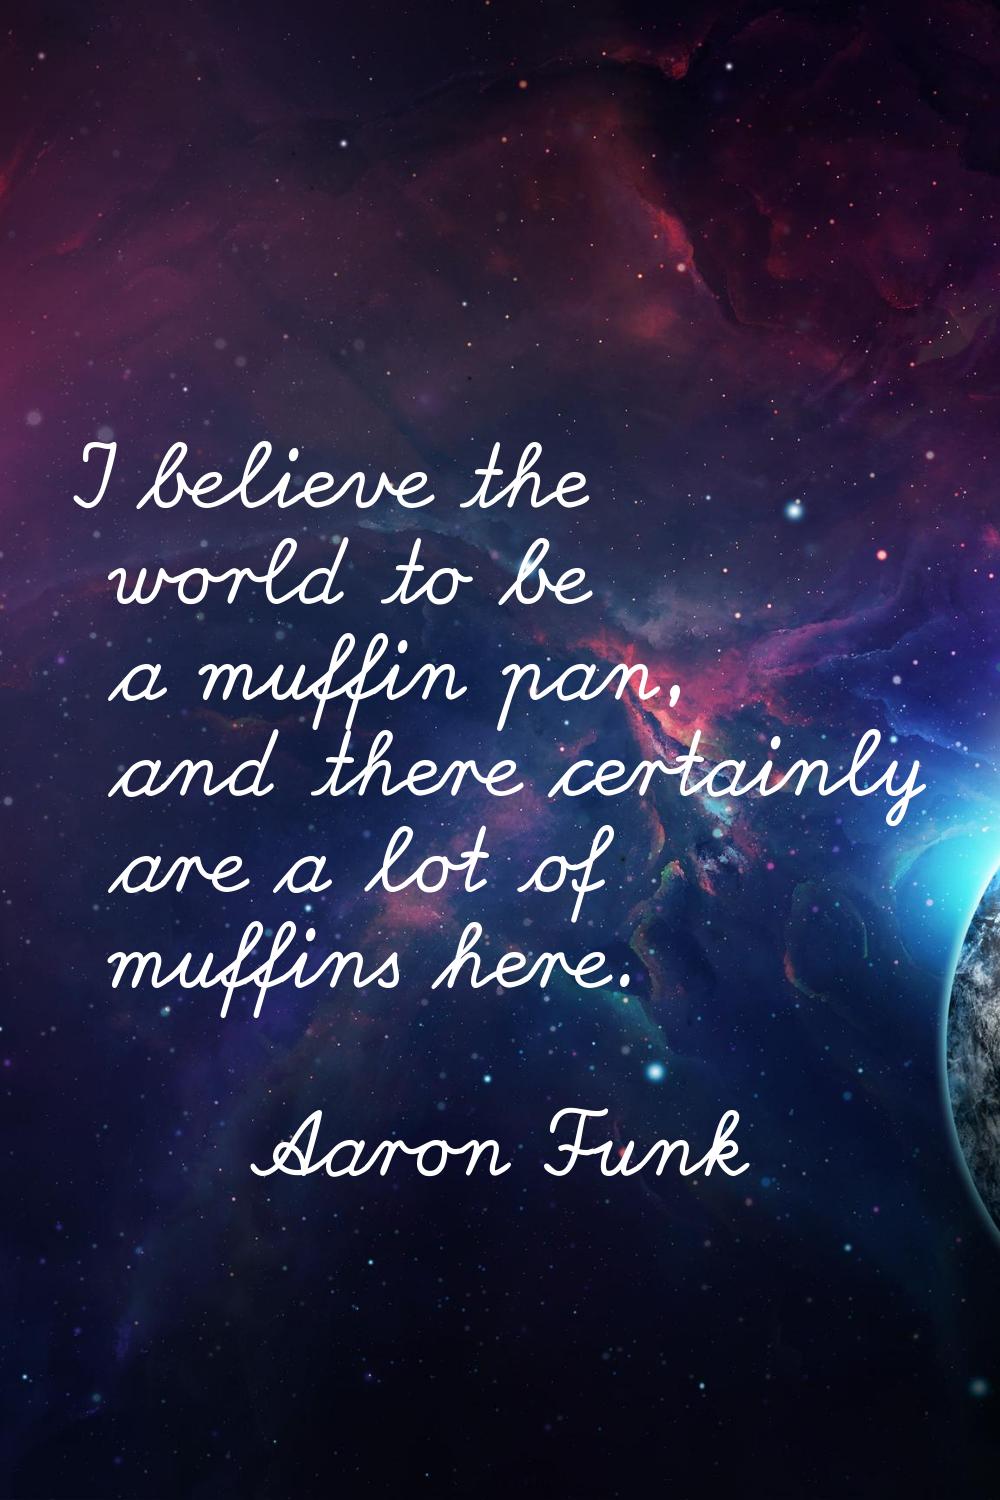 I believe the world to be a muffin pan, and there certainly are a lot of muffins here.